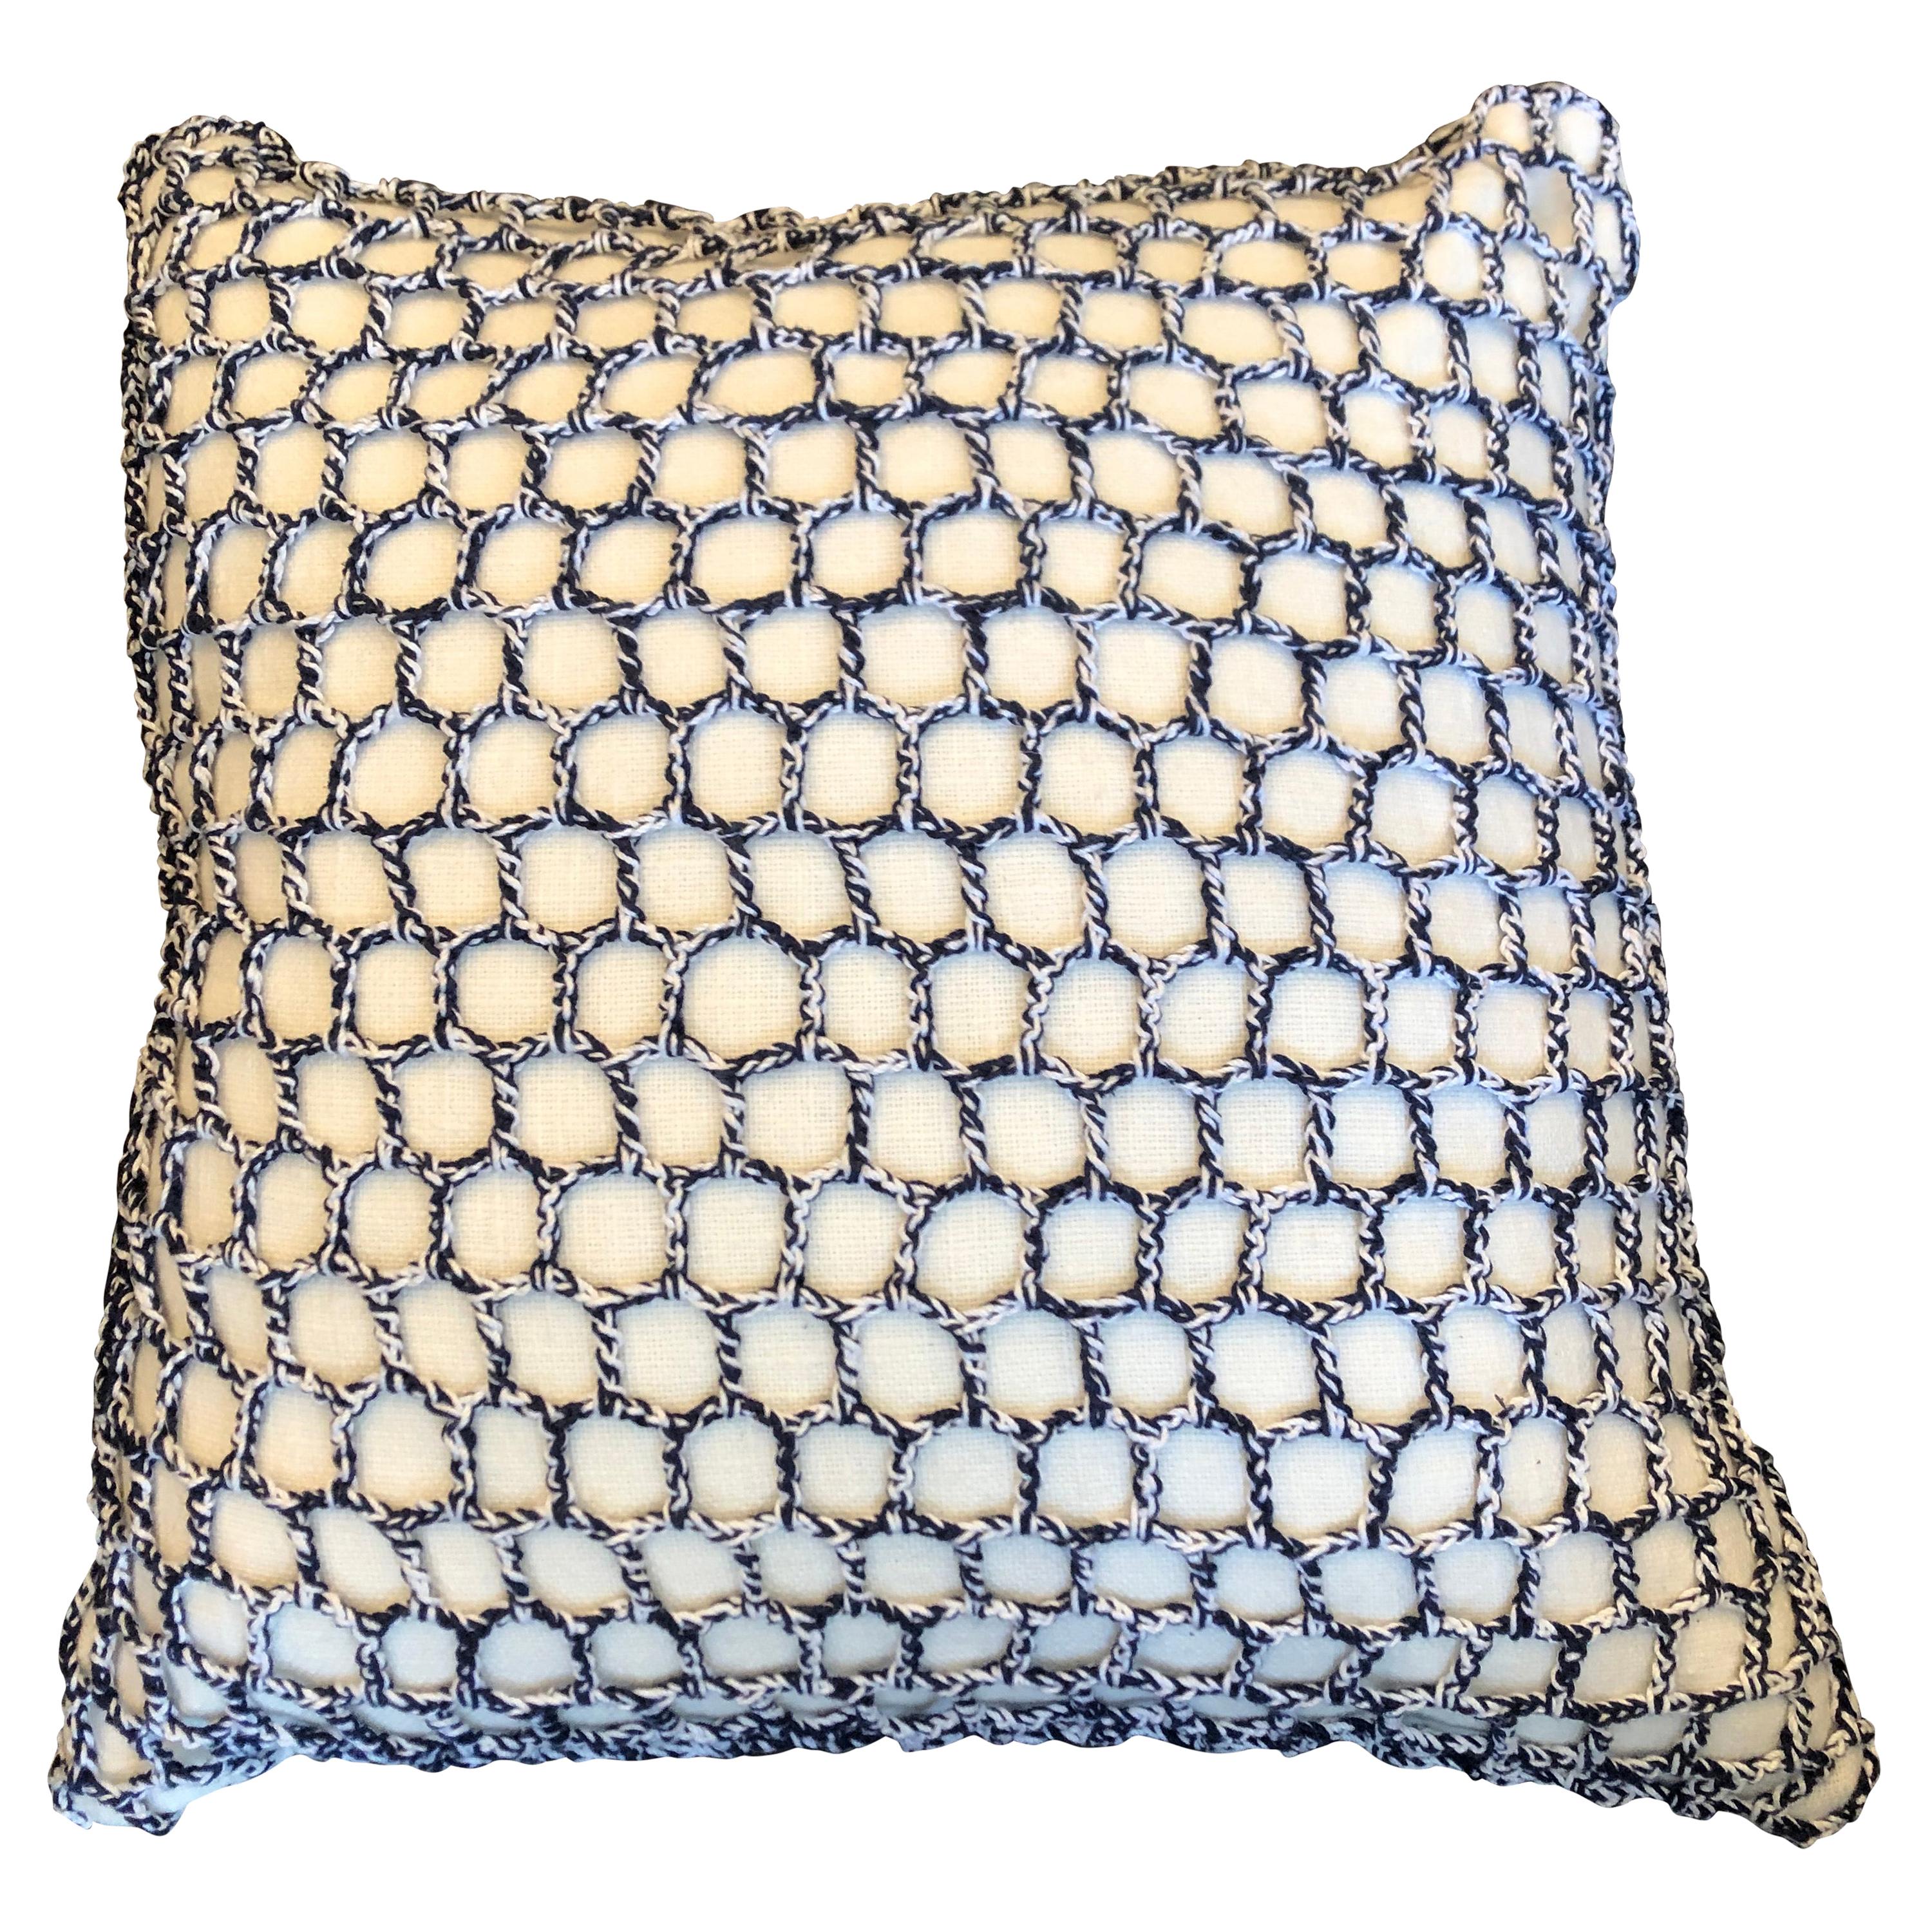  "Anzio" White & Navy Blue Wool Pillow by Le Lampade